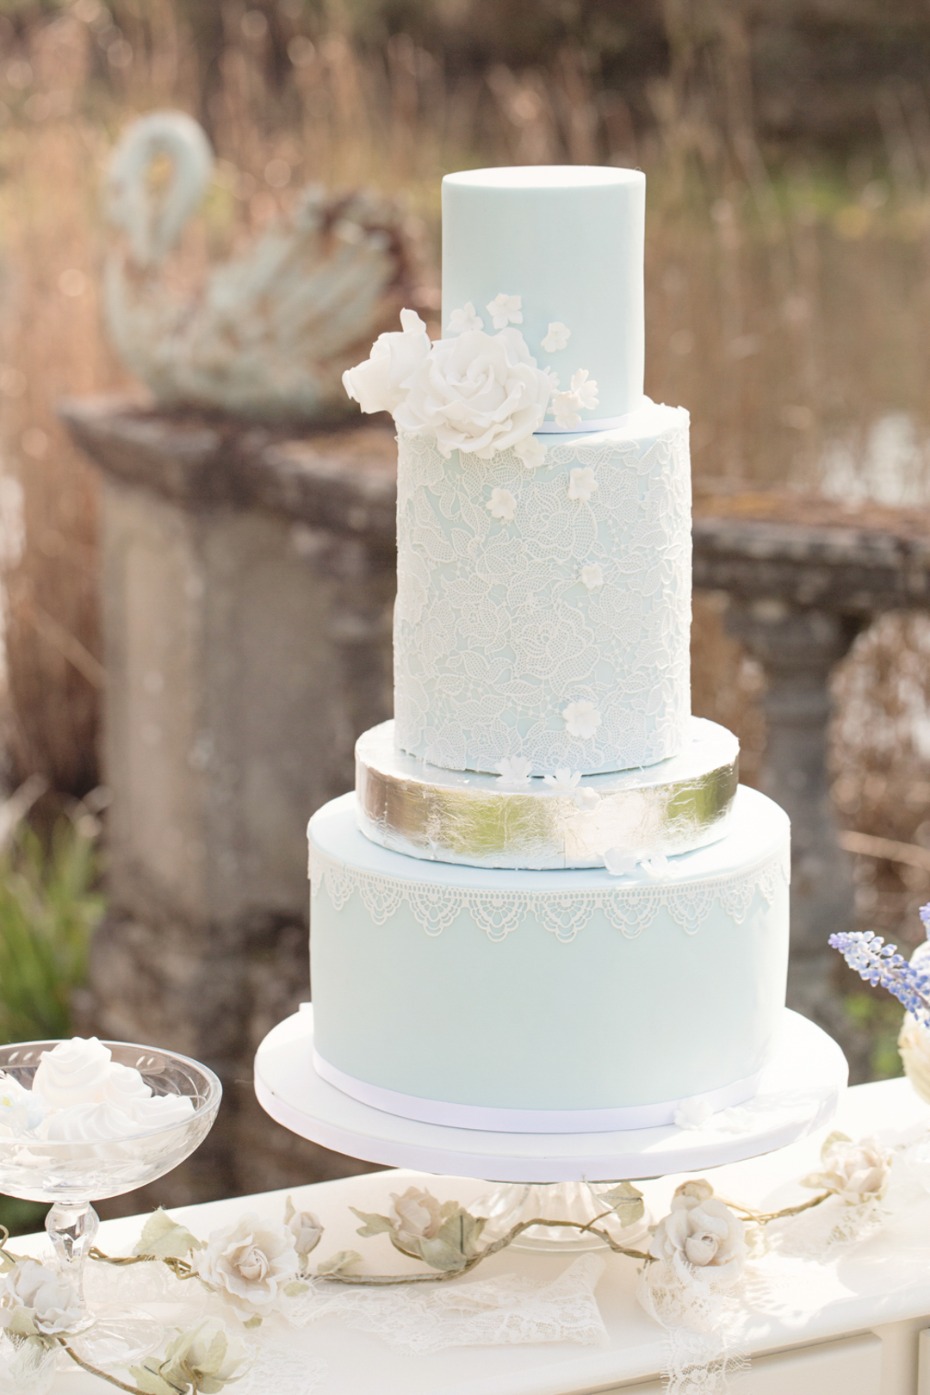 Blue, white and silver wedding cake